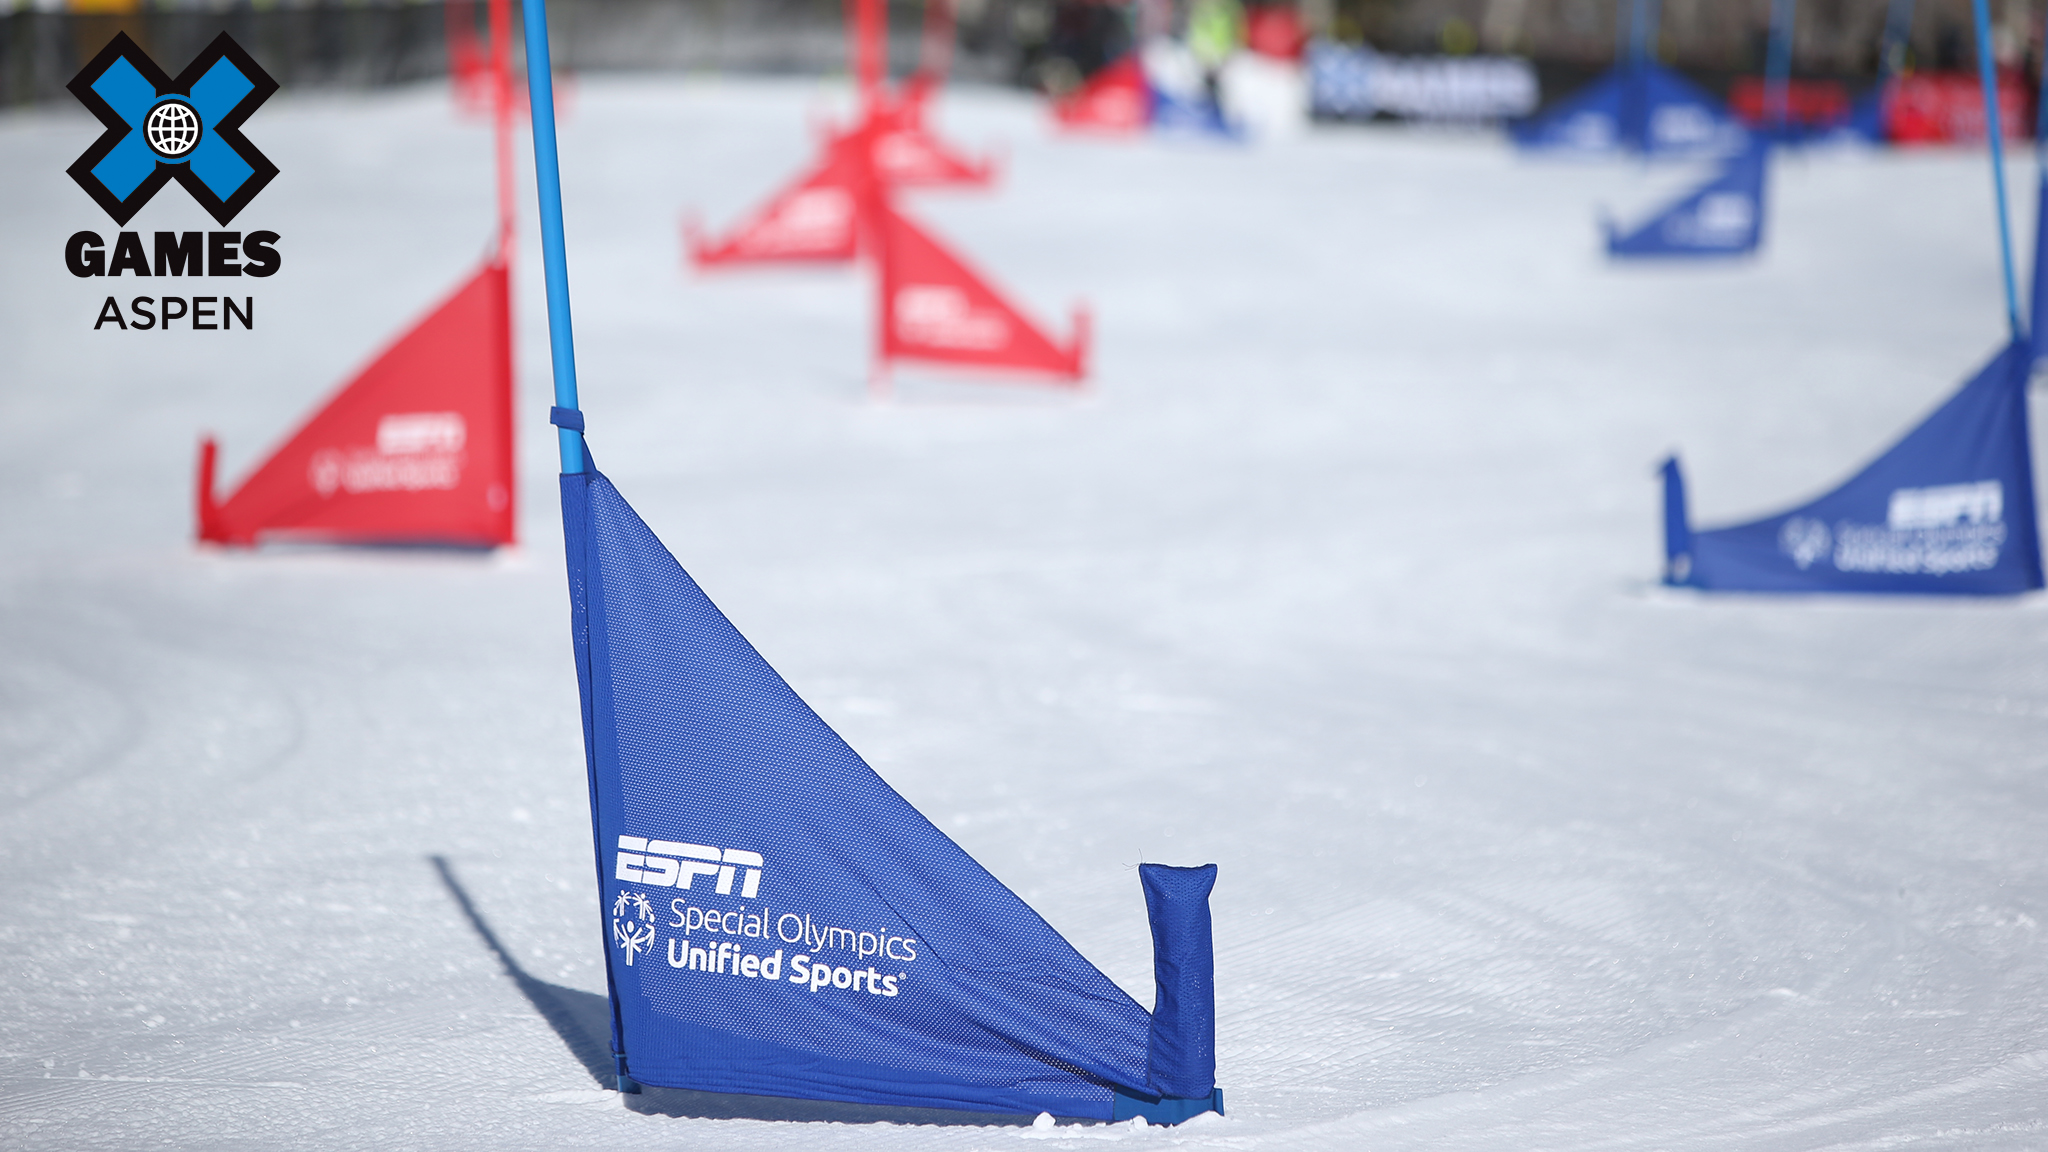 Special Olympics Unified Snowboarding returns to X Games